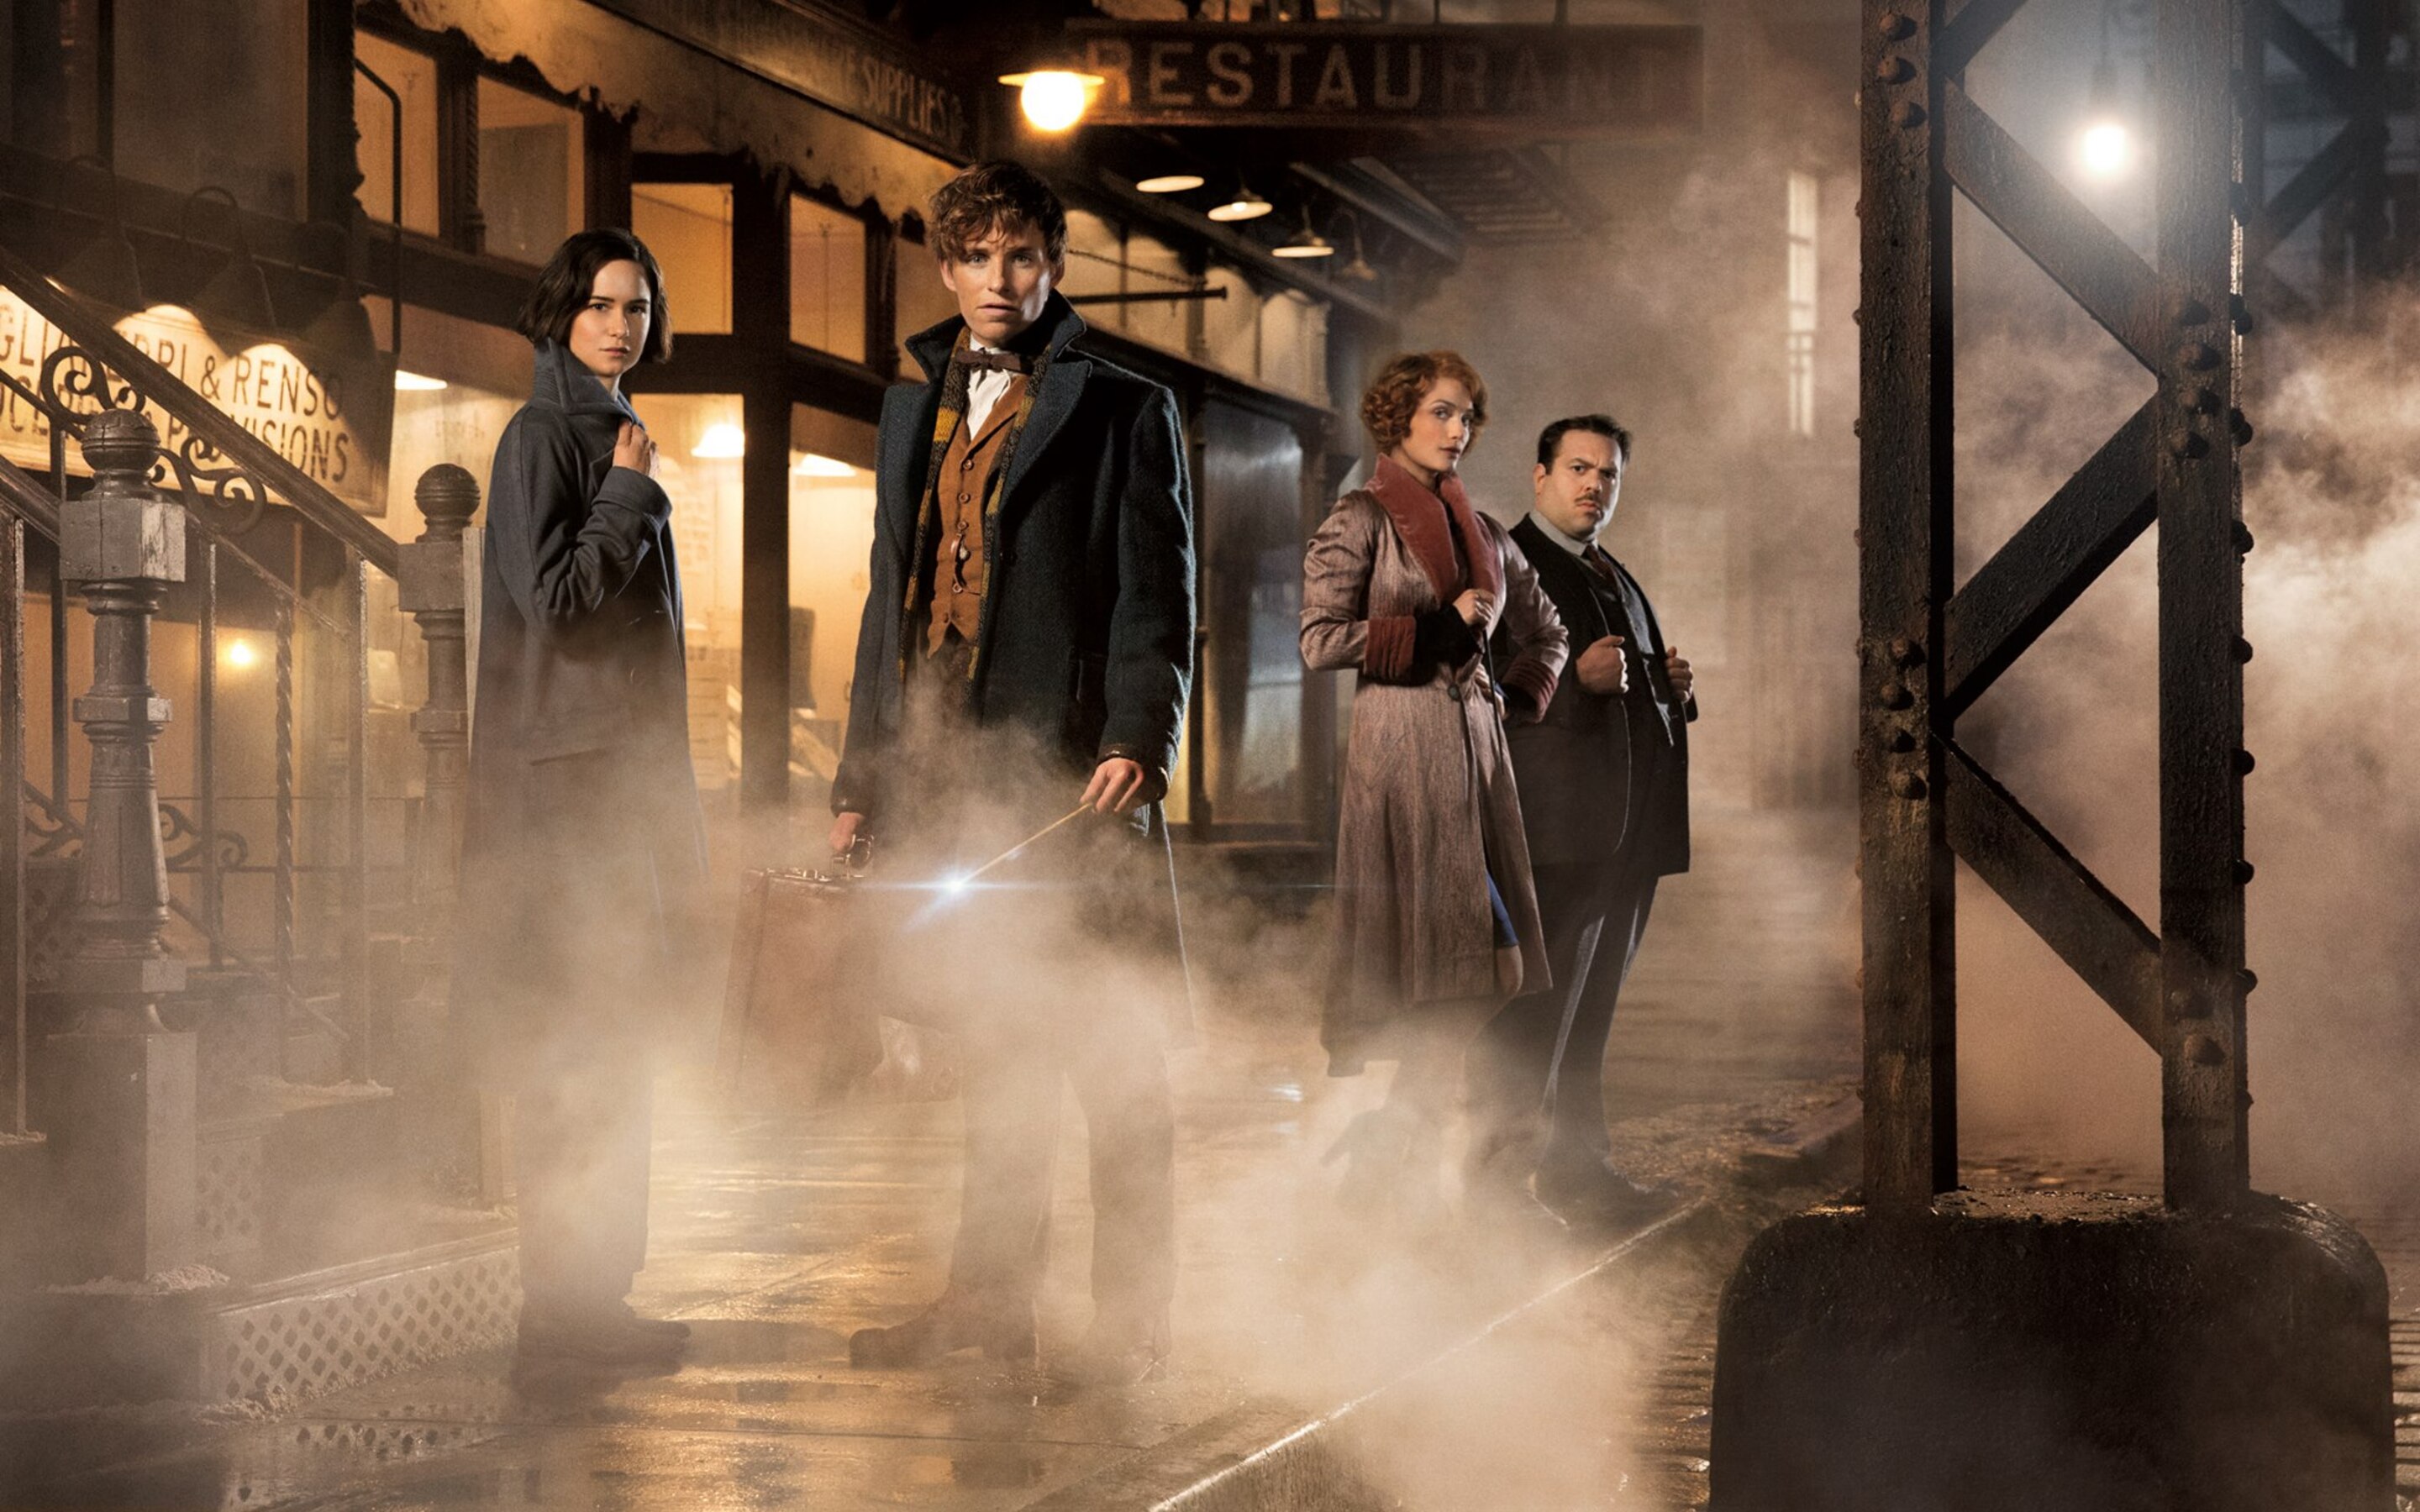 Hd Fantastic Beasts And Where To Find Them Online 2016 Watch Movie